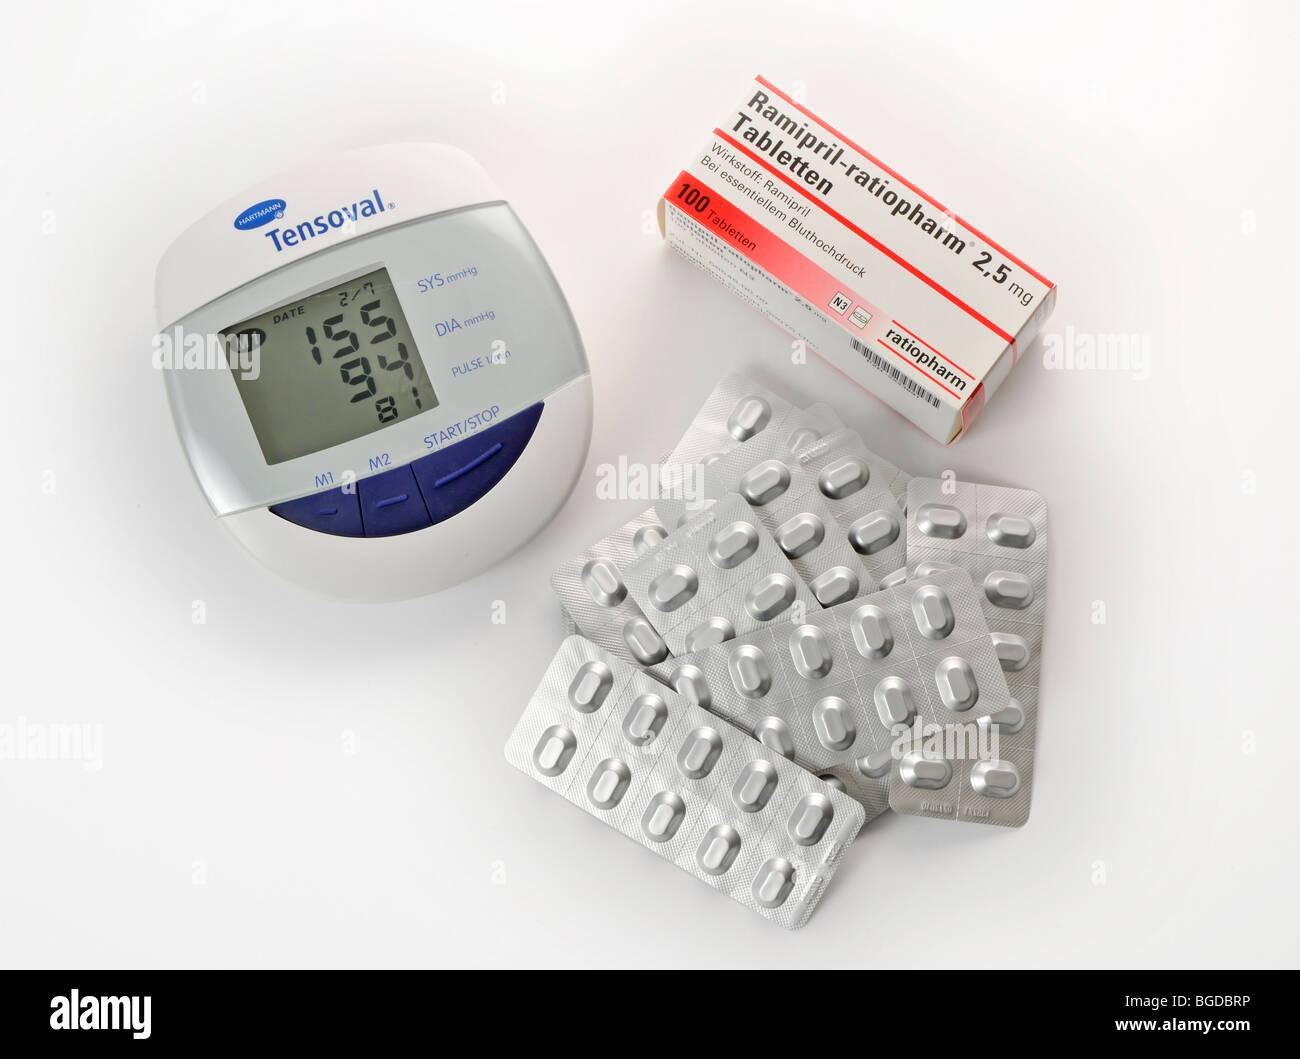 Antihypertensive tablets in a blister pack and phygmomanometer blood pressure meter, showing high blood pressure Stock Photo